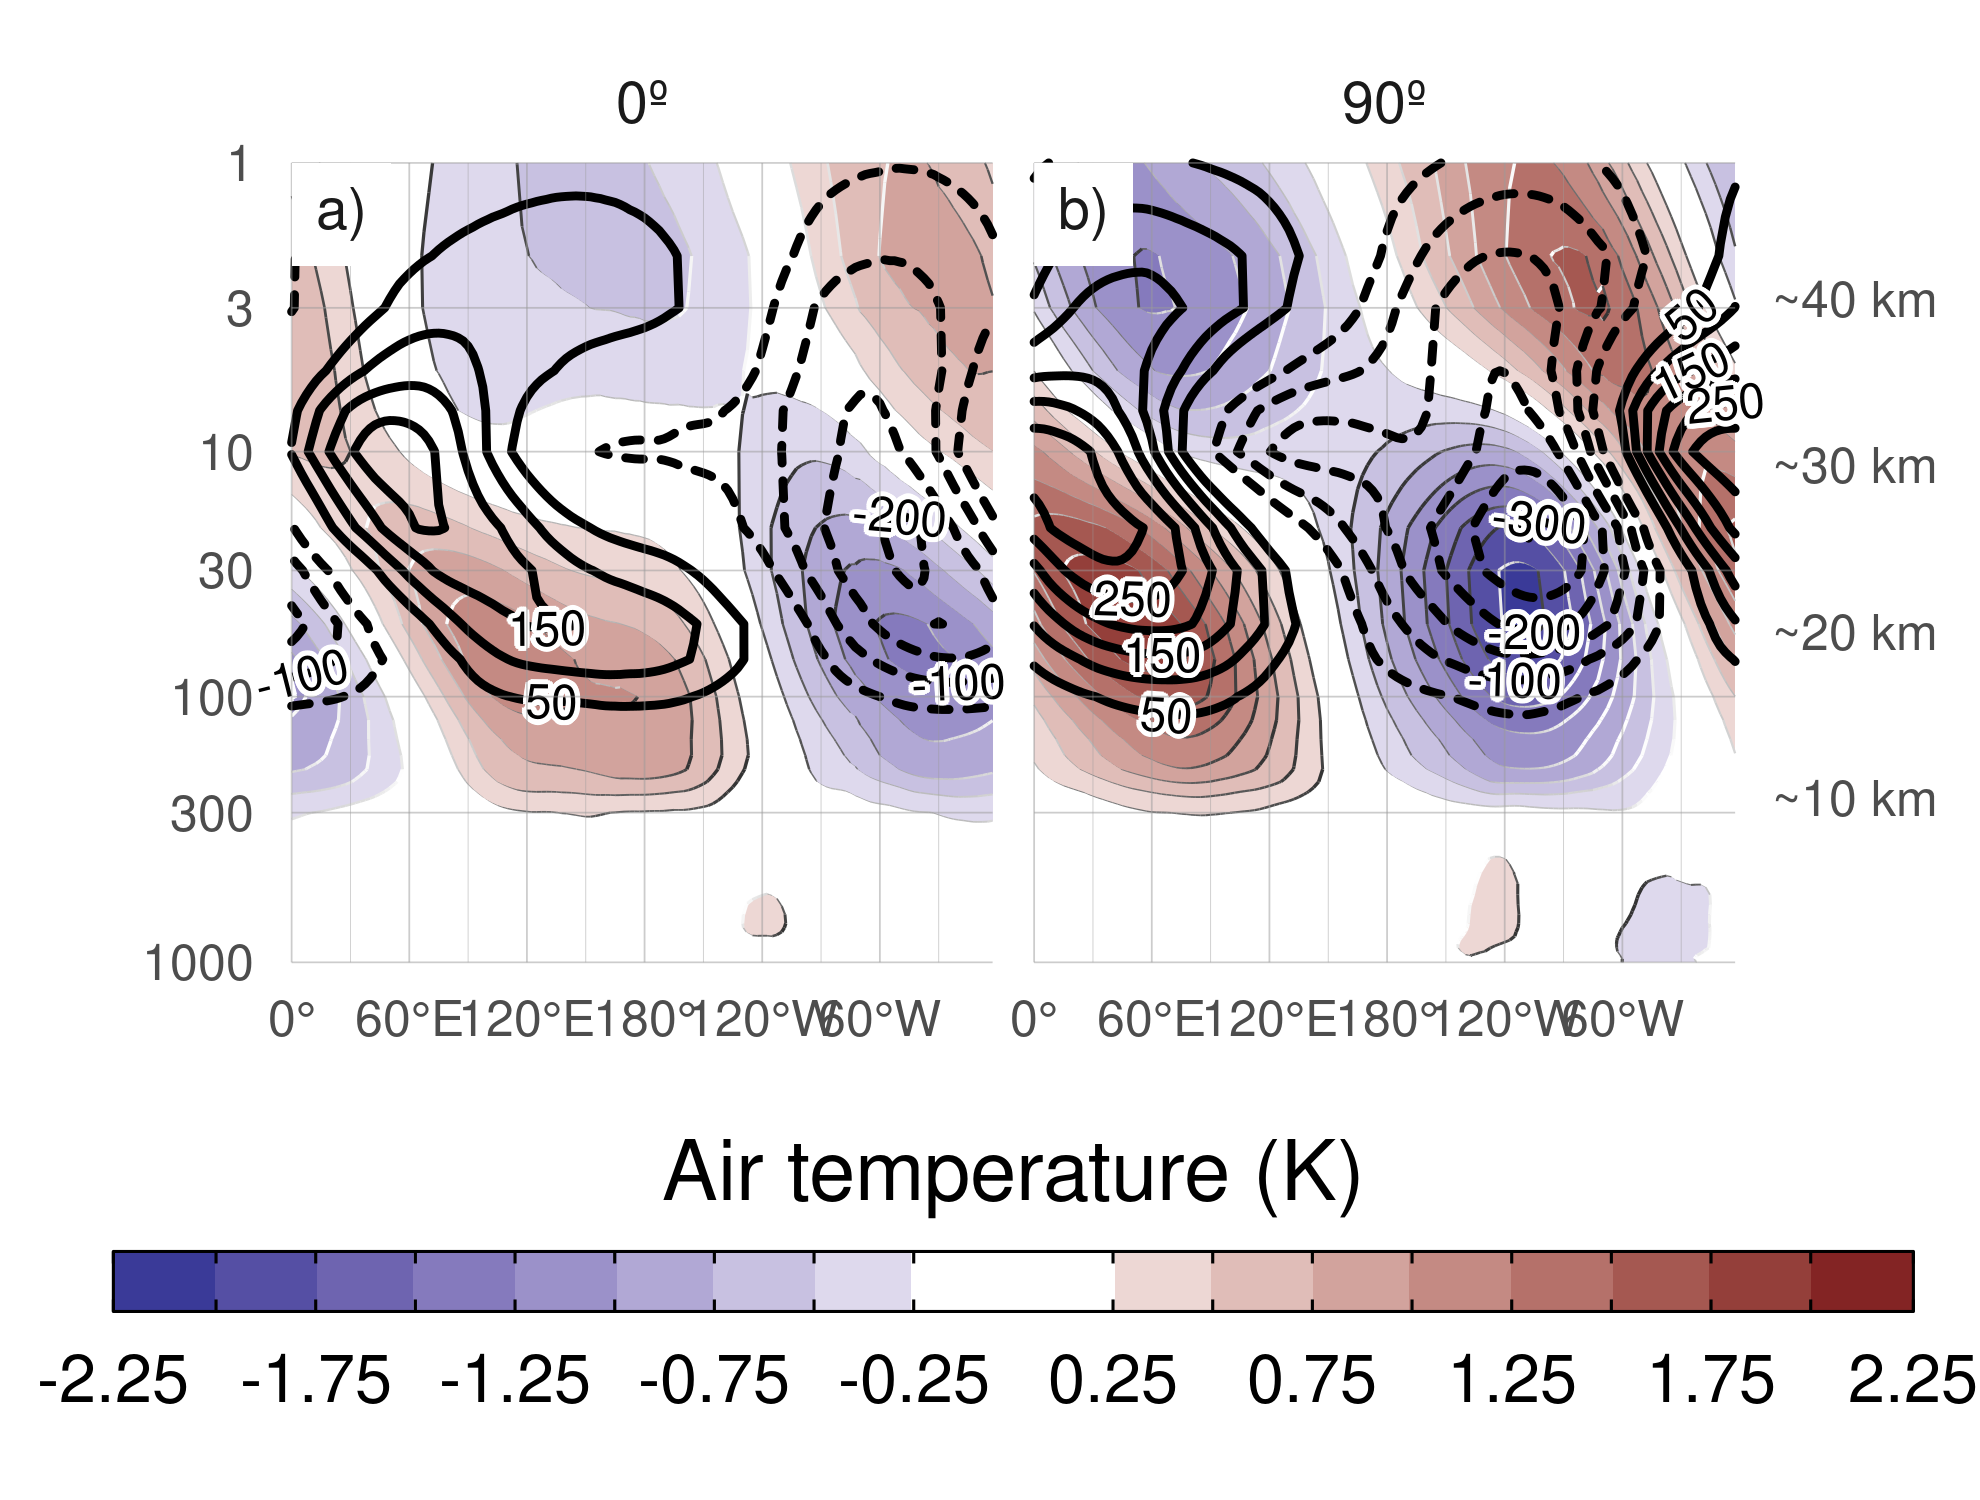 Regression of SON zonal anomalies averaged between 75°S and 45°S of mean air temperature (shaded, Kelvin) and ozone mixing ratio (contours, negative contours with dashed lines, labels in parts per billion by mass) with the (a) 0º and (b) 90º phase of the cEOF1 for the 1979 – 2019 period.